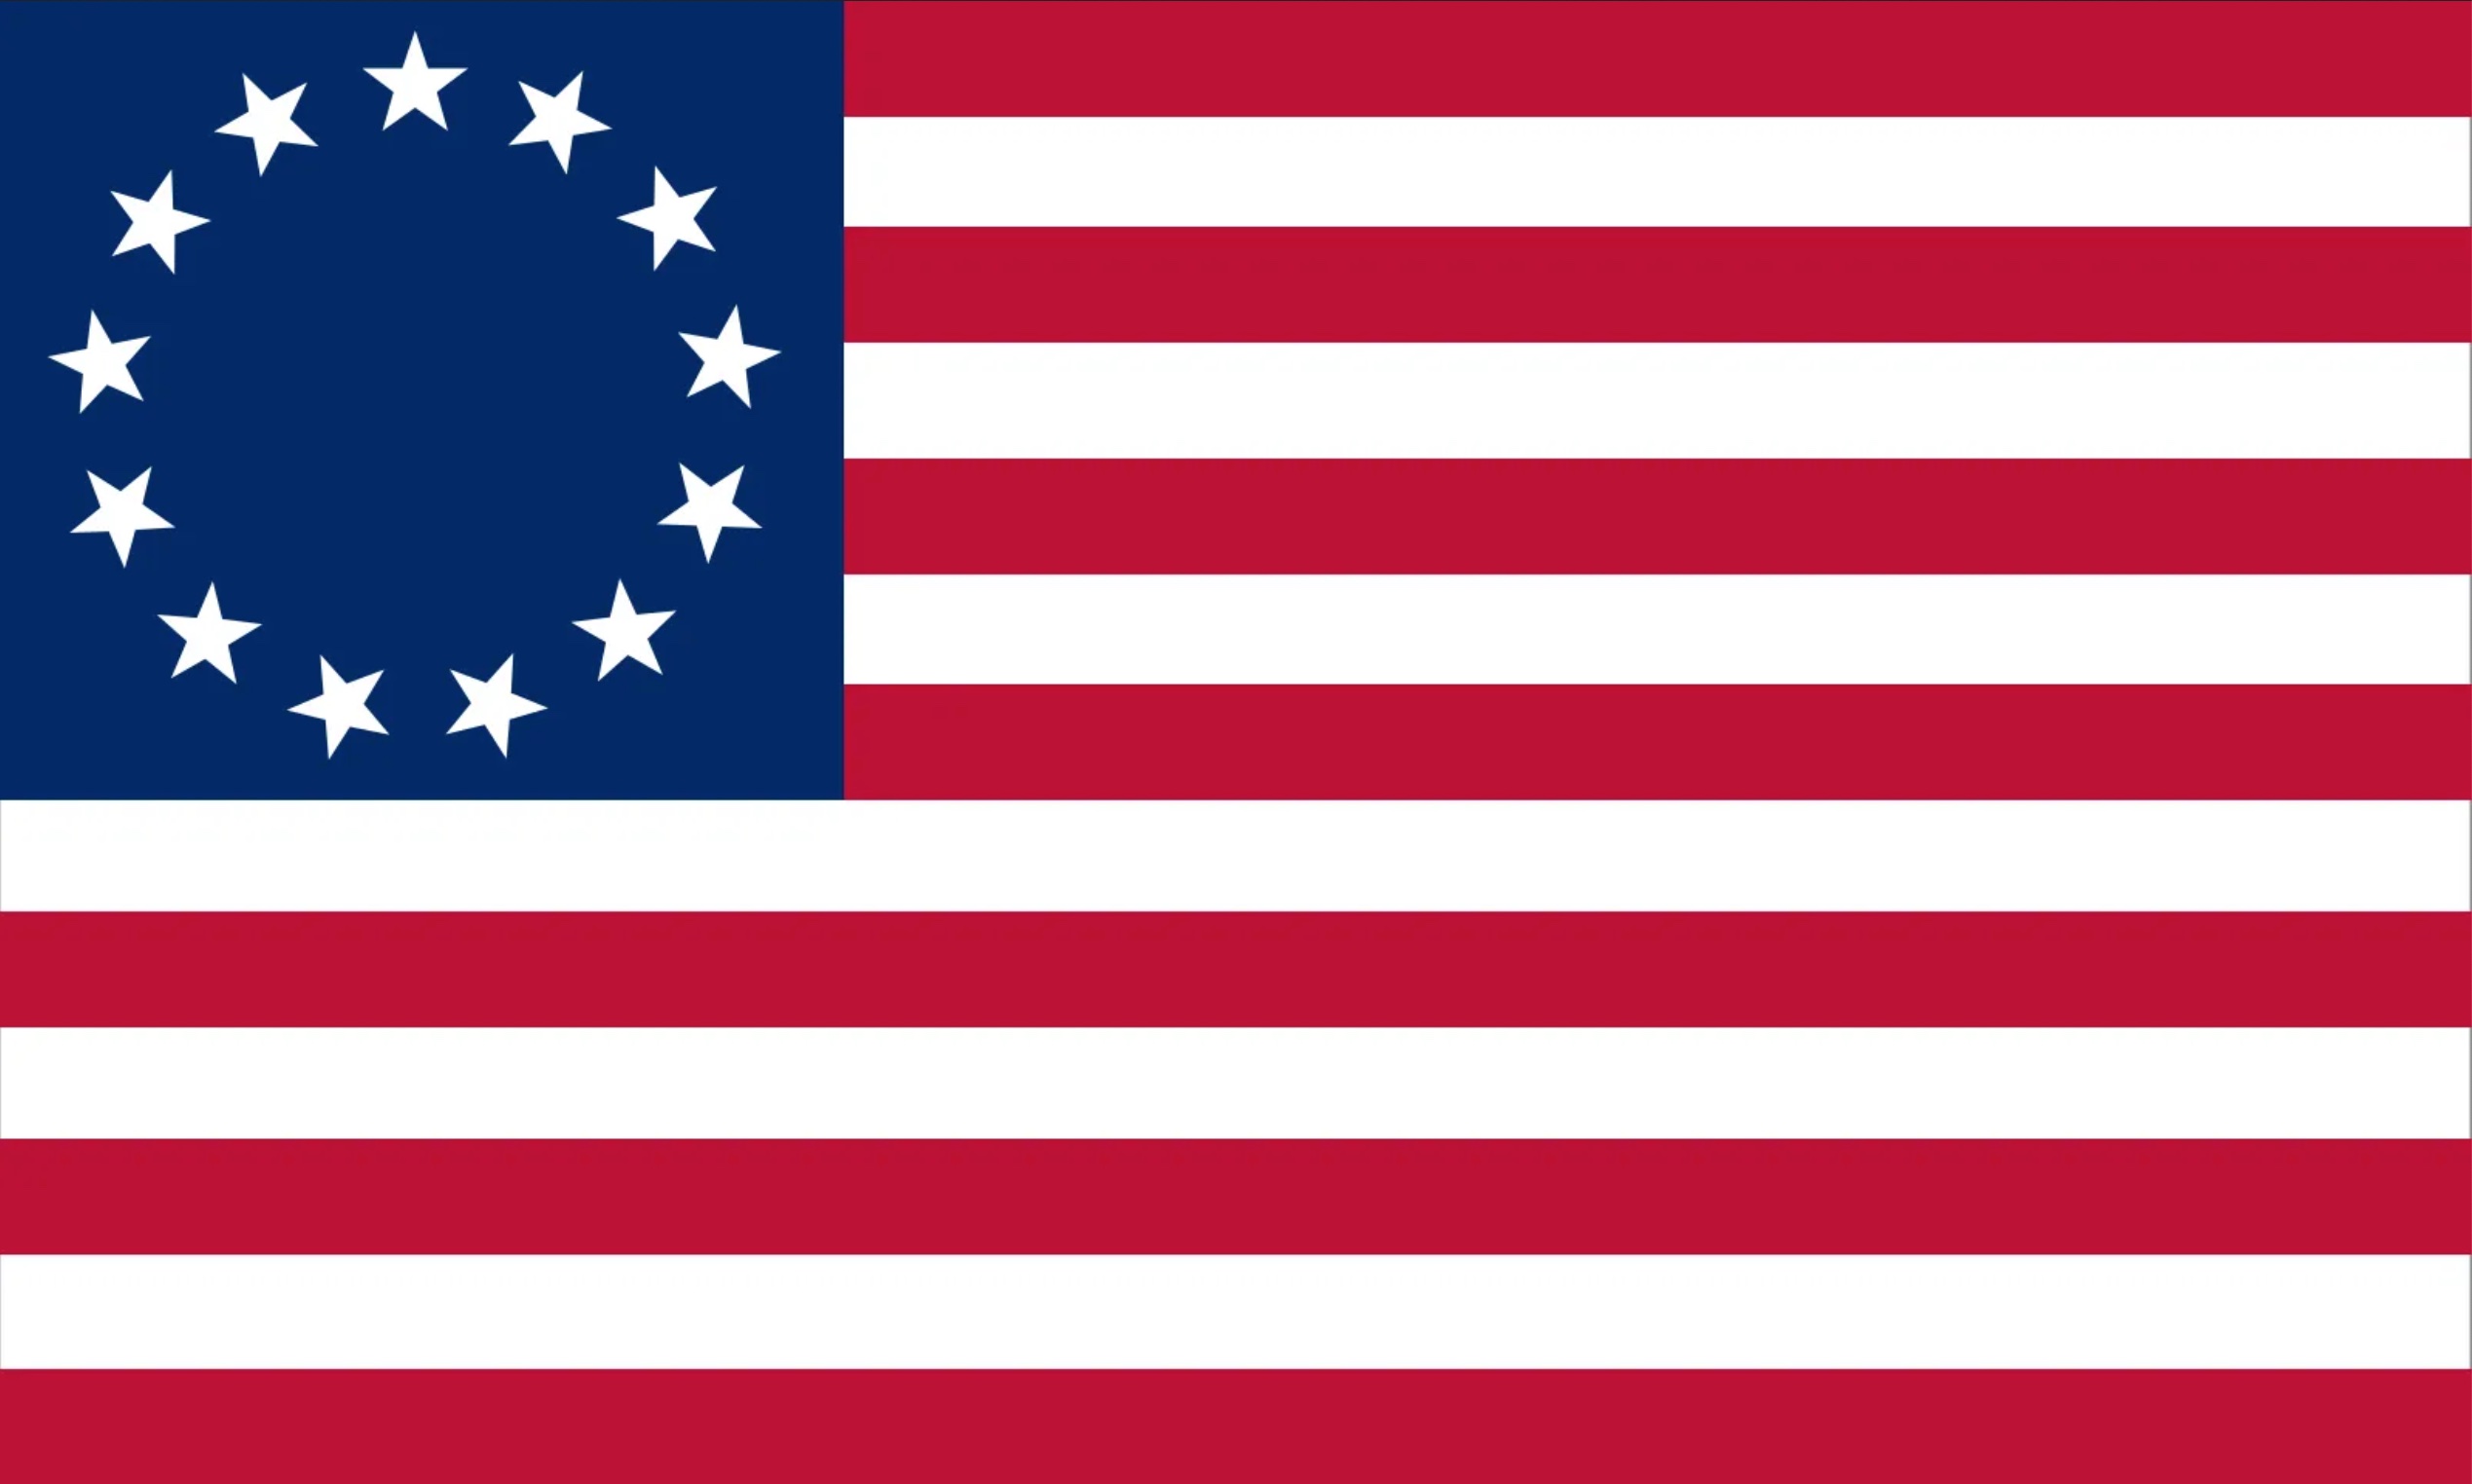 Flag of the 13 colonies